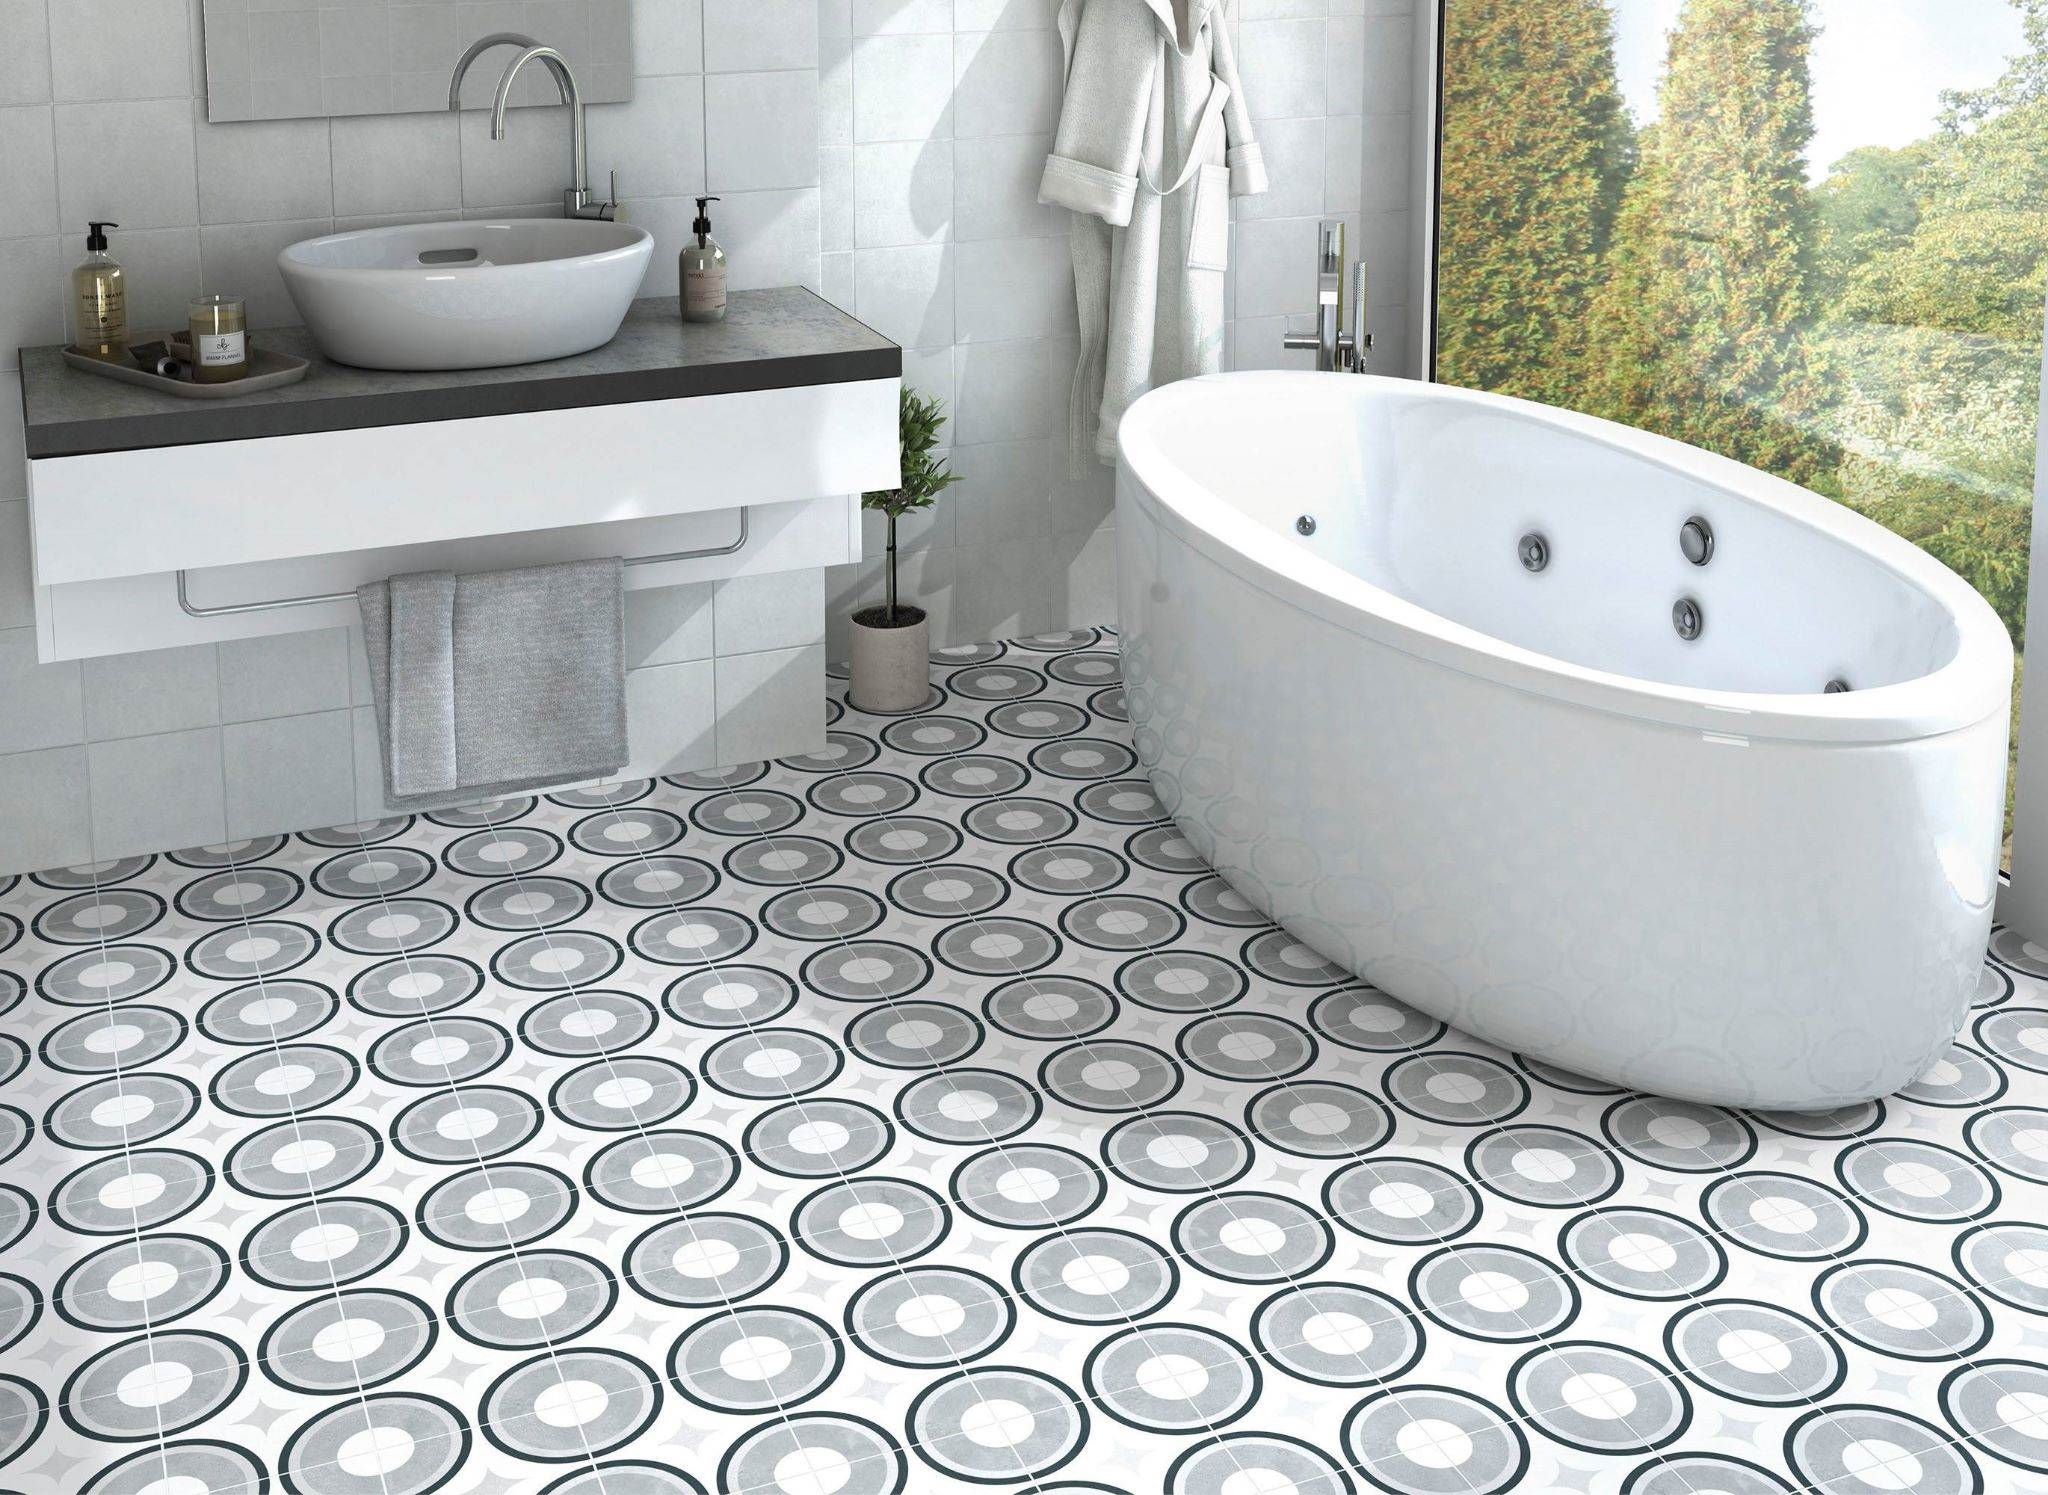 Décor Civic | Stones & More | Finest selection of Mosaics, Glass, Tile and Stone